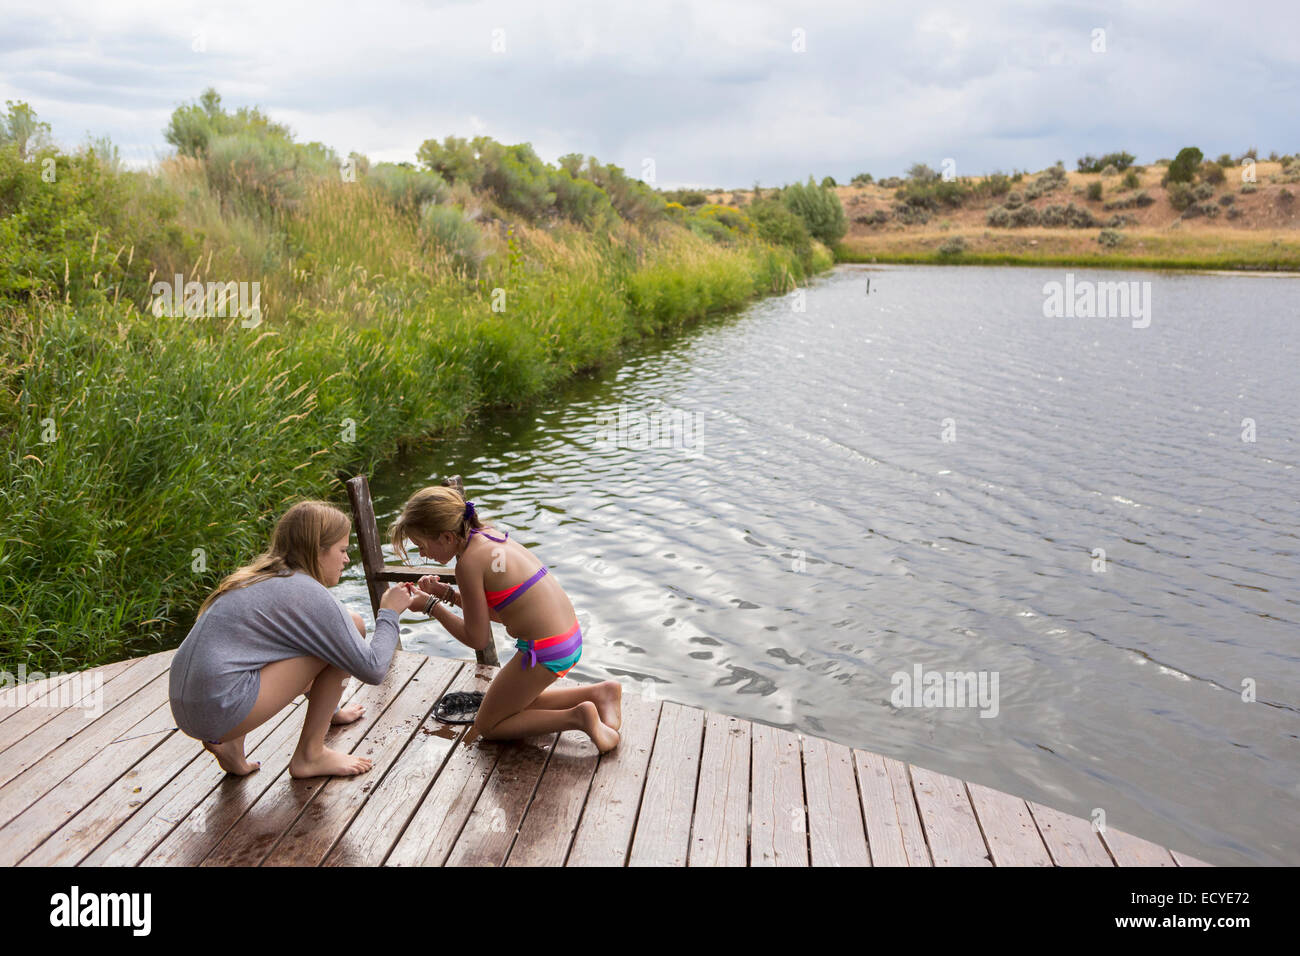 Sisters playing together on wooden dock near lake Stock Photo